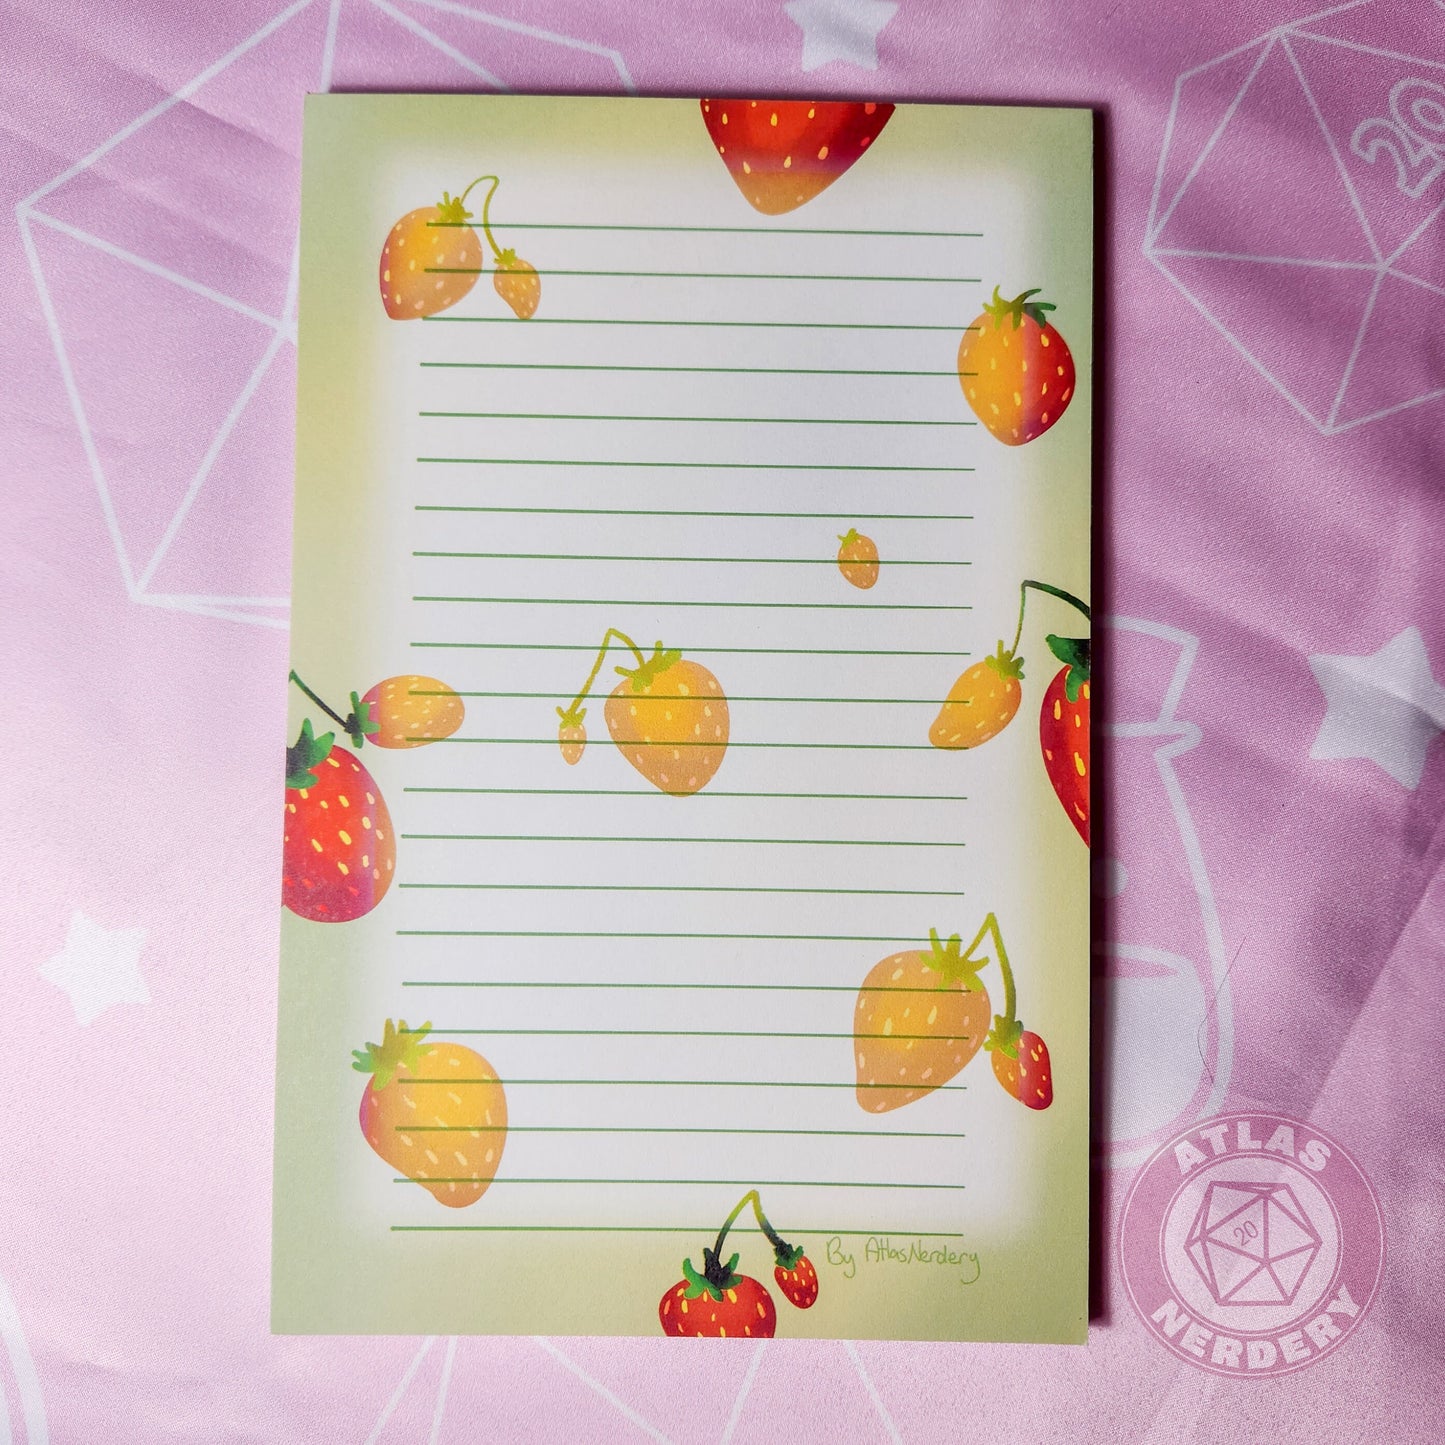 Large Strawberry Notepad - 8.5in x 5.5in Non-Sticky Tear-Away Memo Notepad 50 Pages - Grocery, Shopping, To-Do List